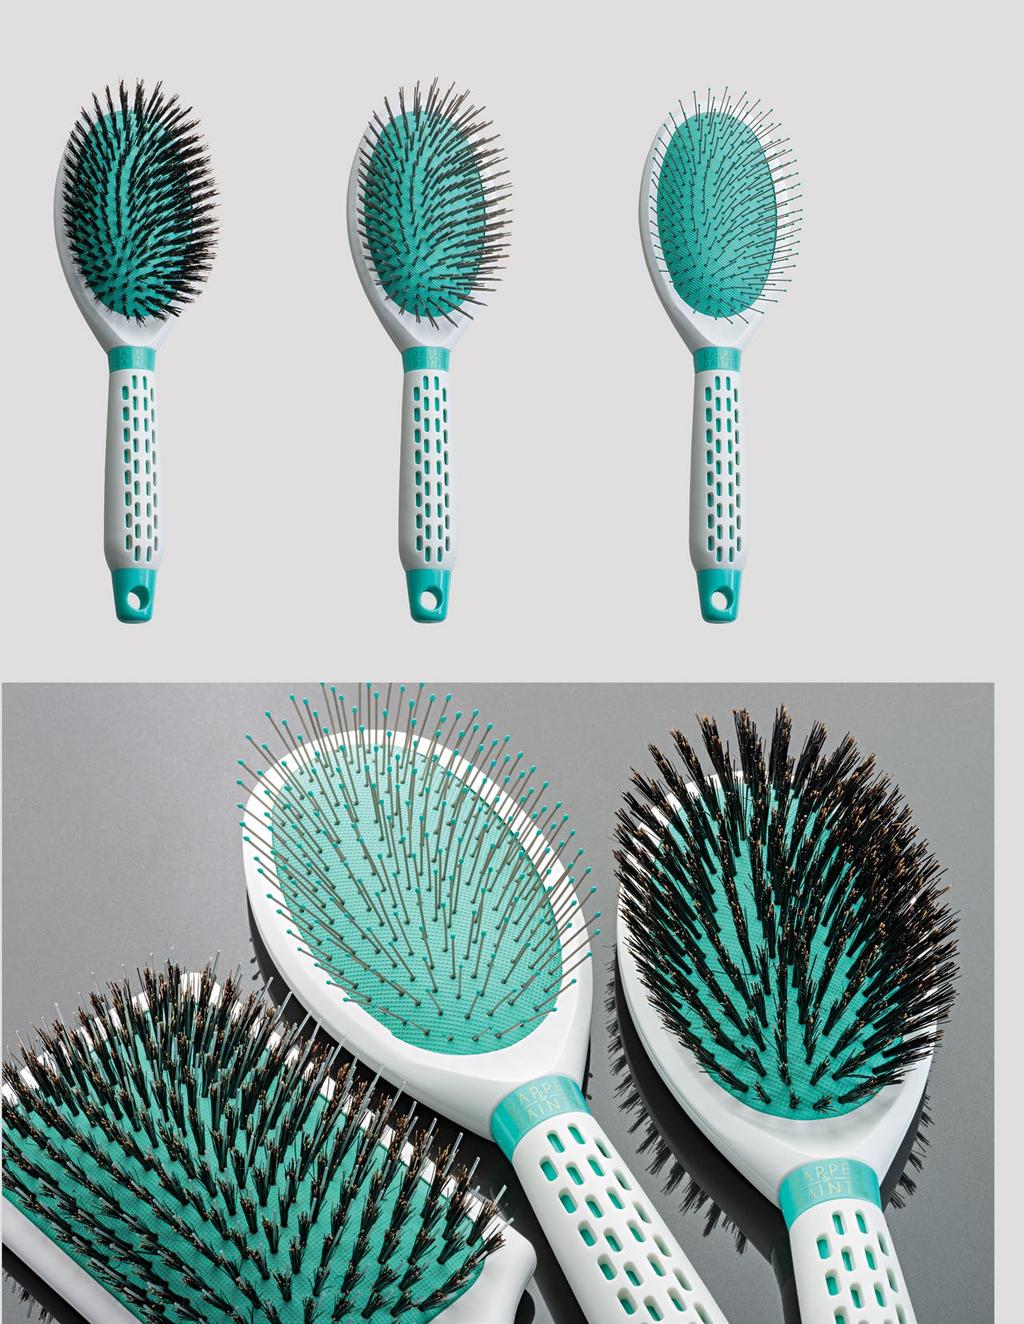 #80024 Ergo Grip Oval Boar Brush Breathable, see through handle Great for styling & daily care on all hair types & extensions 100% boar bristles Comfortable & durable soft cushion Great for all hair